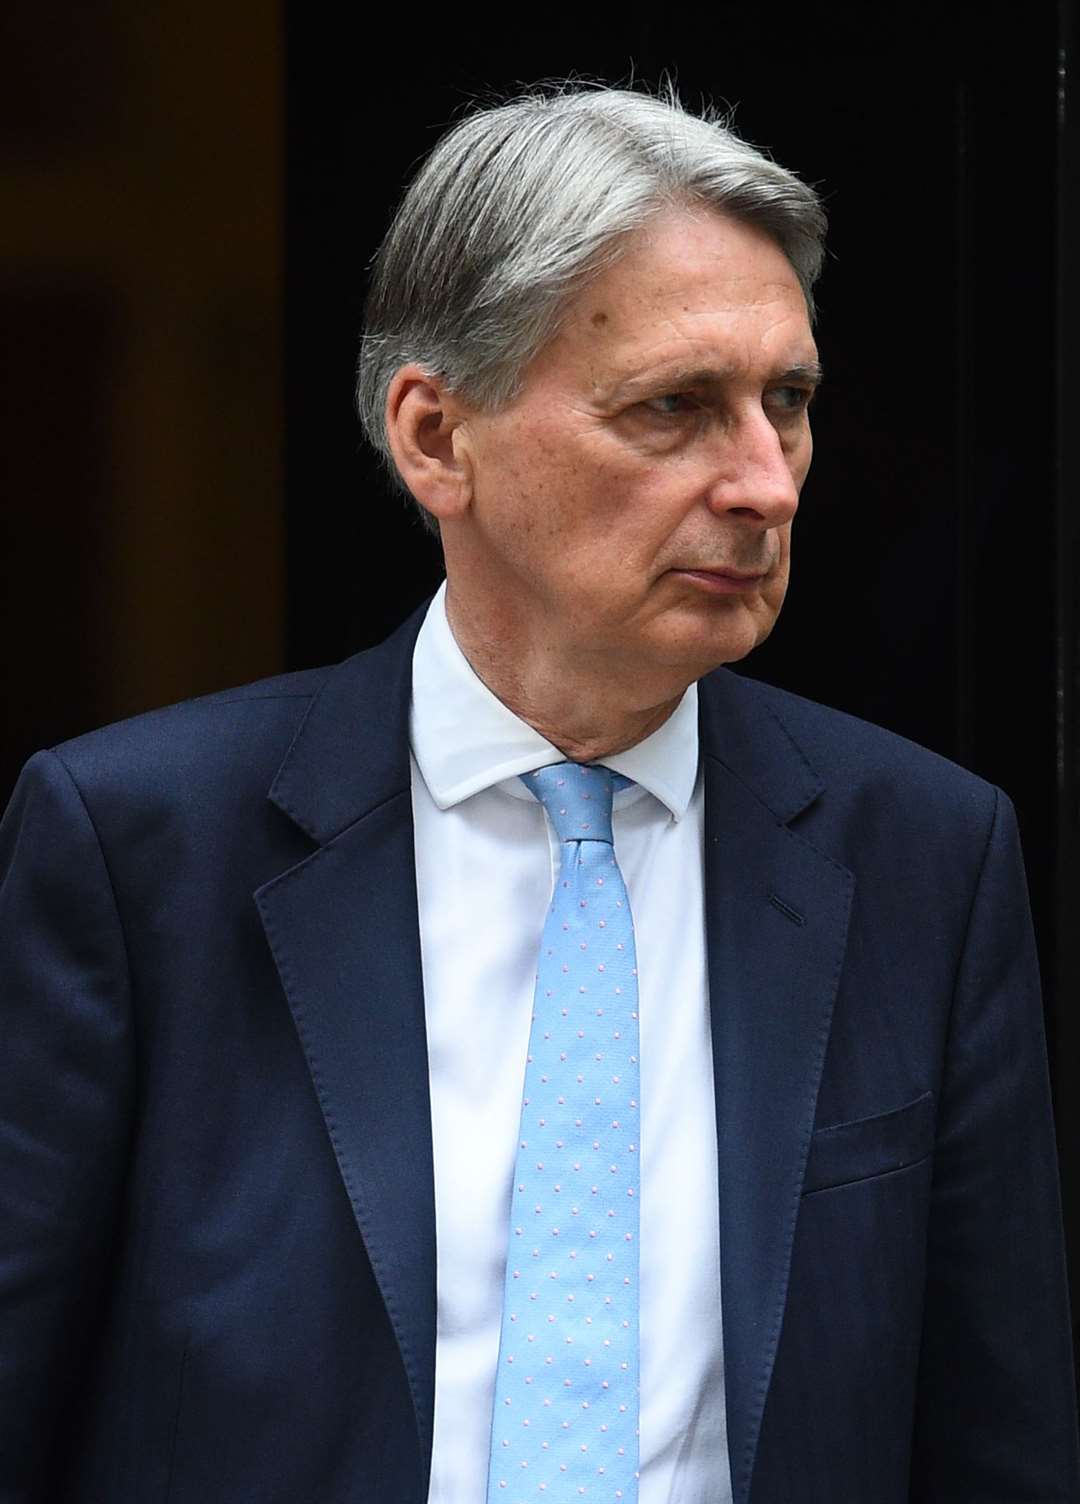 Former chancellor Philip Hammond has spoken out against the plan (Kirsty O’Connor/PA)